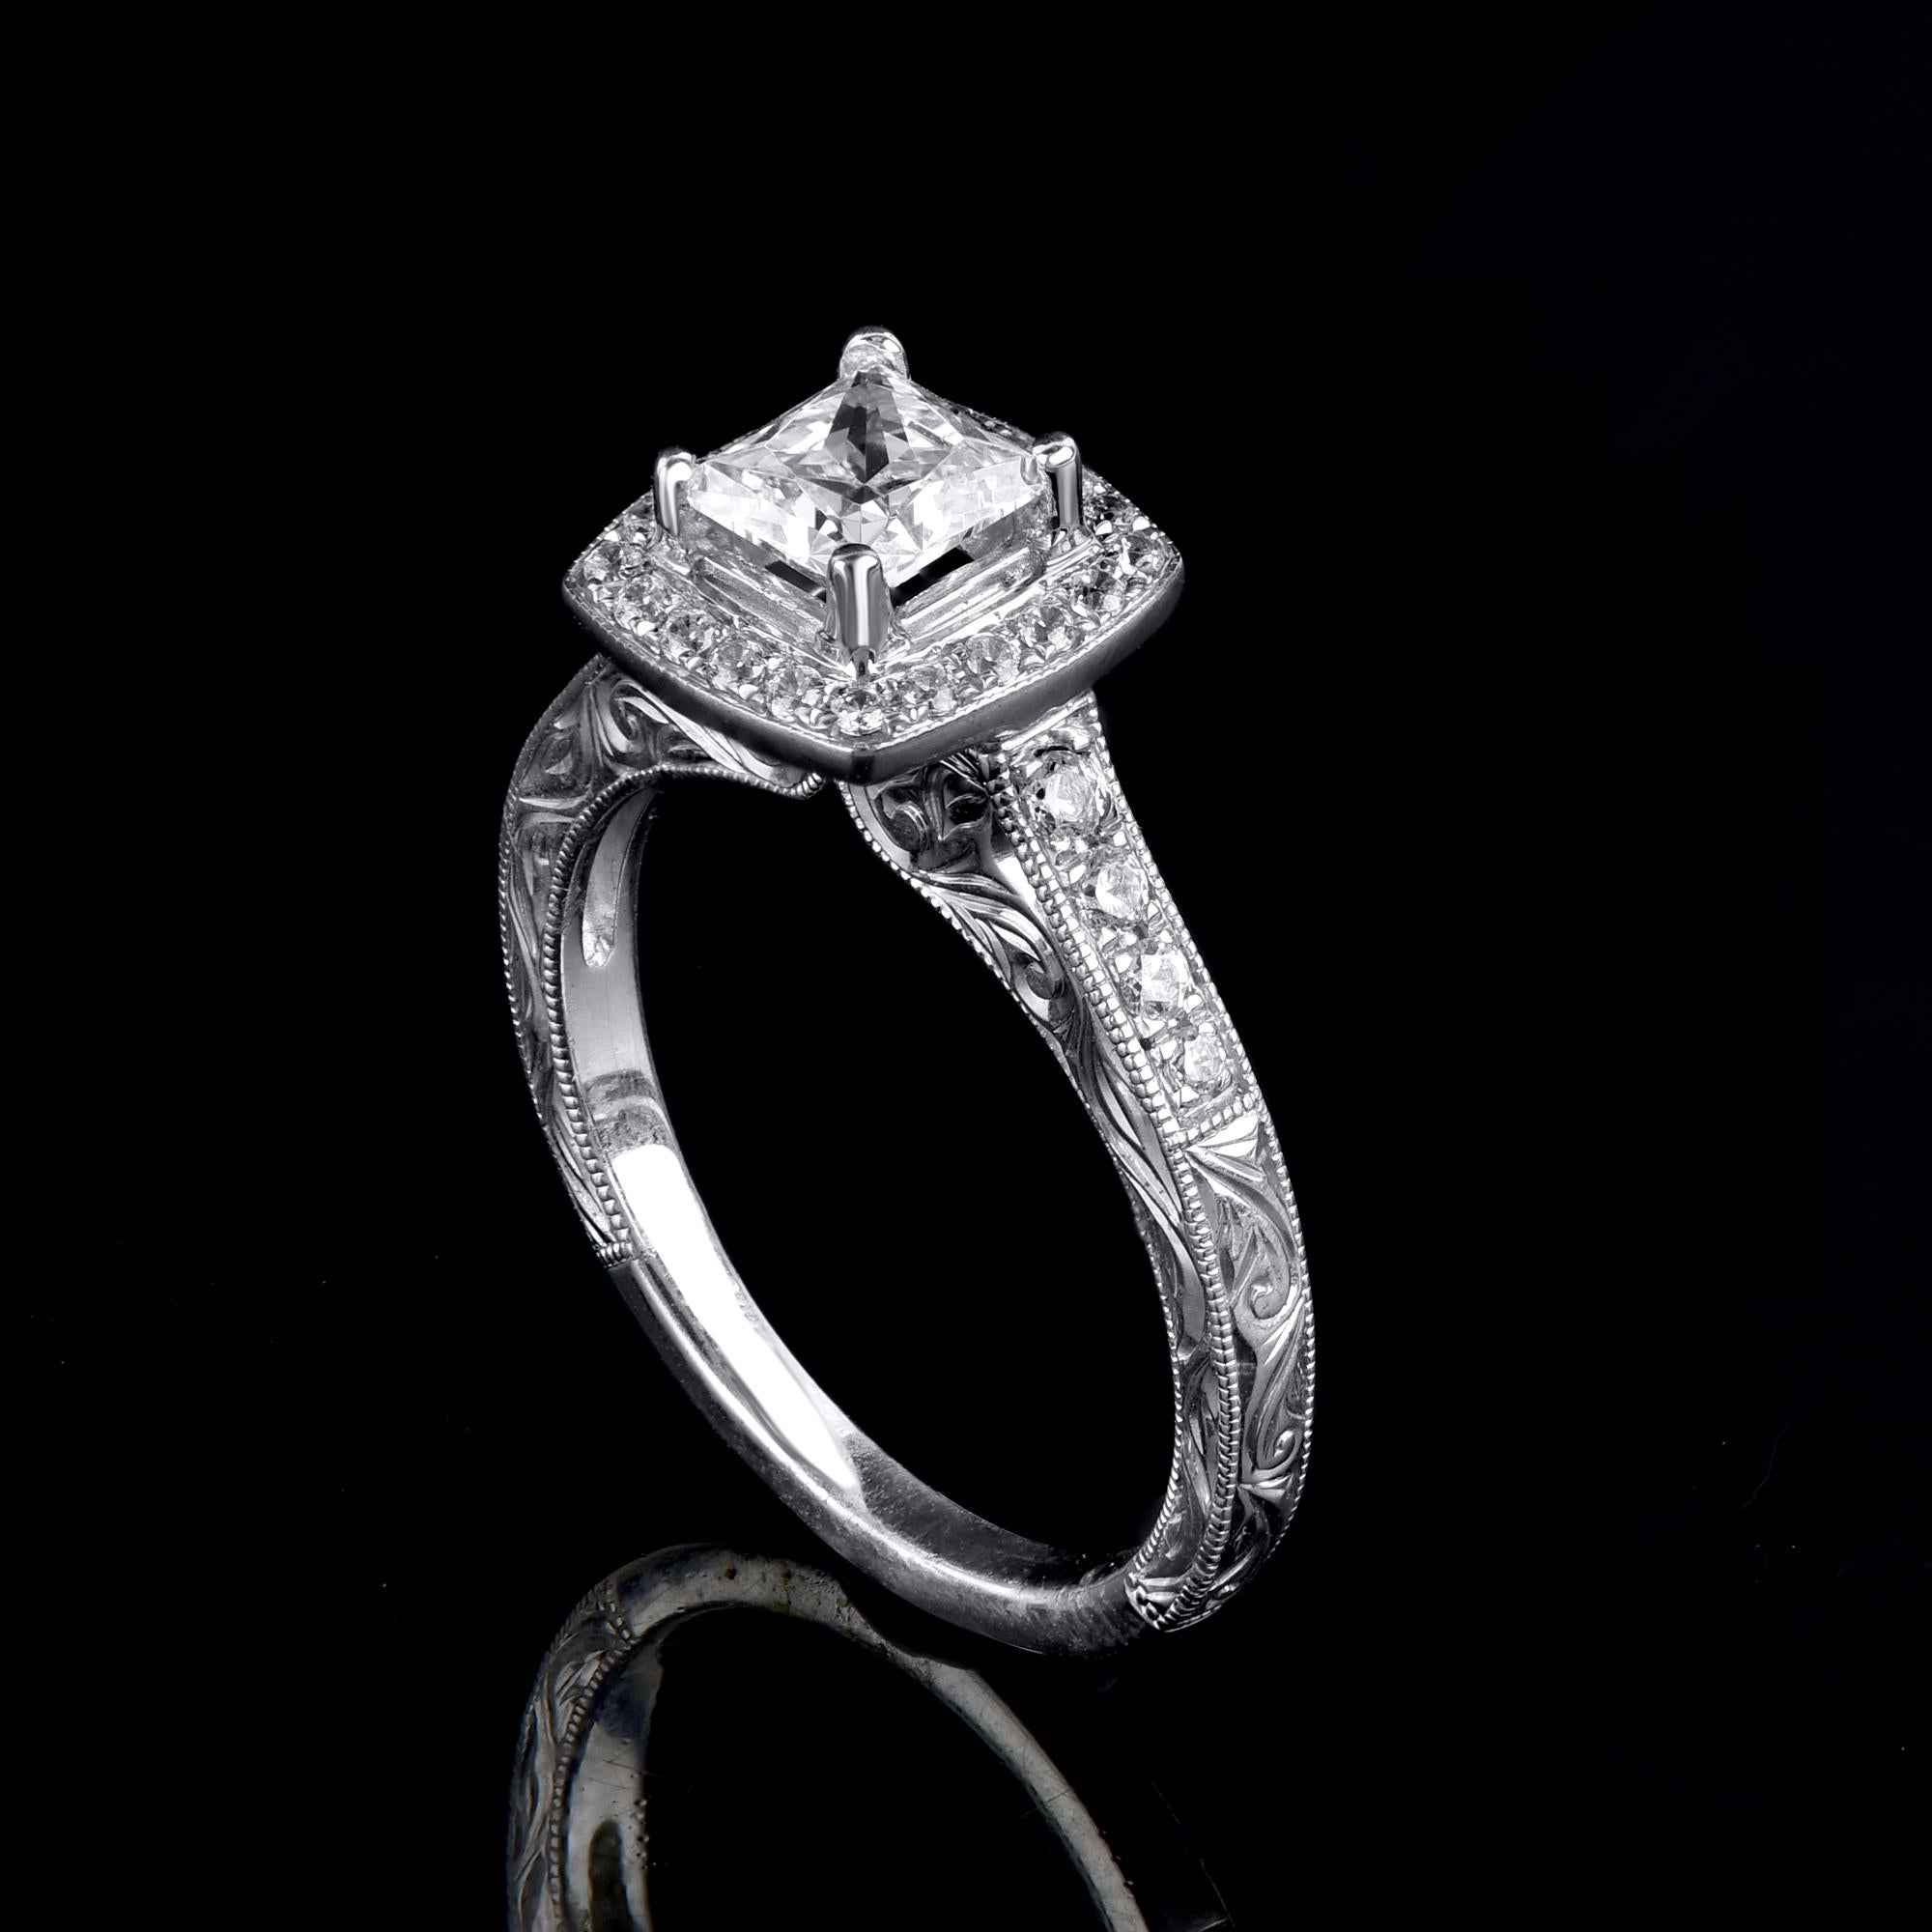 Let the timeless elegance of this Diamond Engagement Ring speak for you. This Ring is expertly crafted in 14 Karat White Gold and features 0.80 ct centre stone and 0.30 ct diamond frame and shank lined diamonds set in prong setting. The diamond are